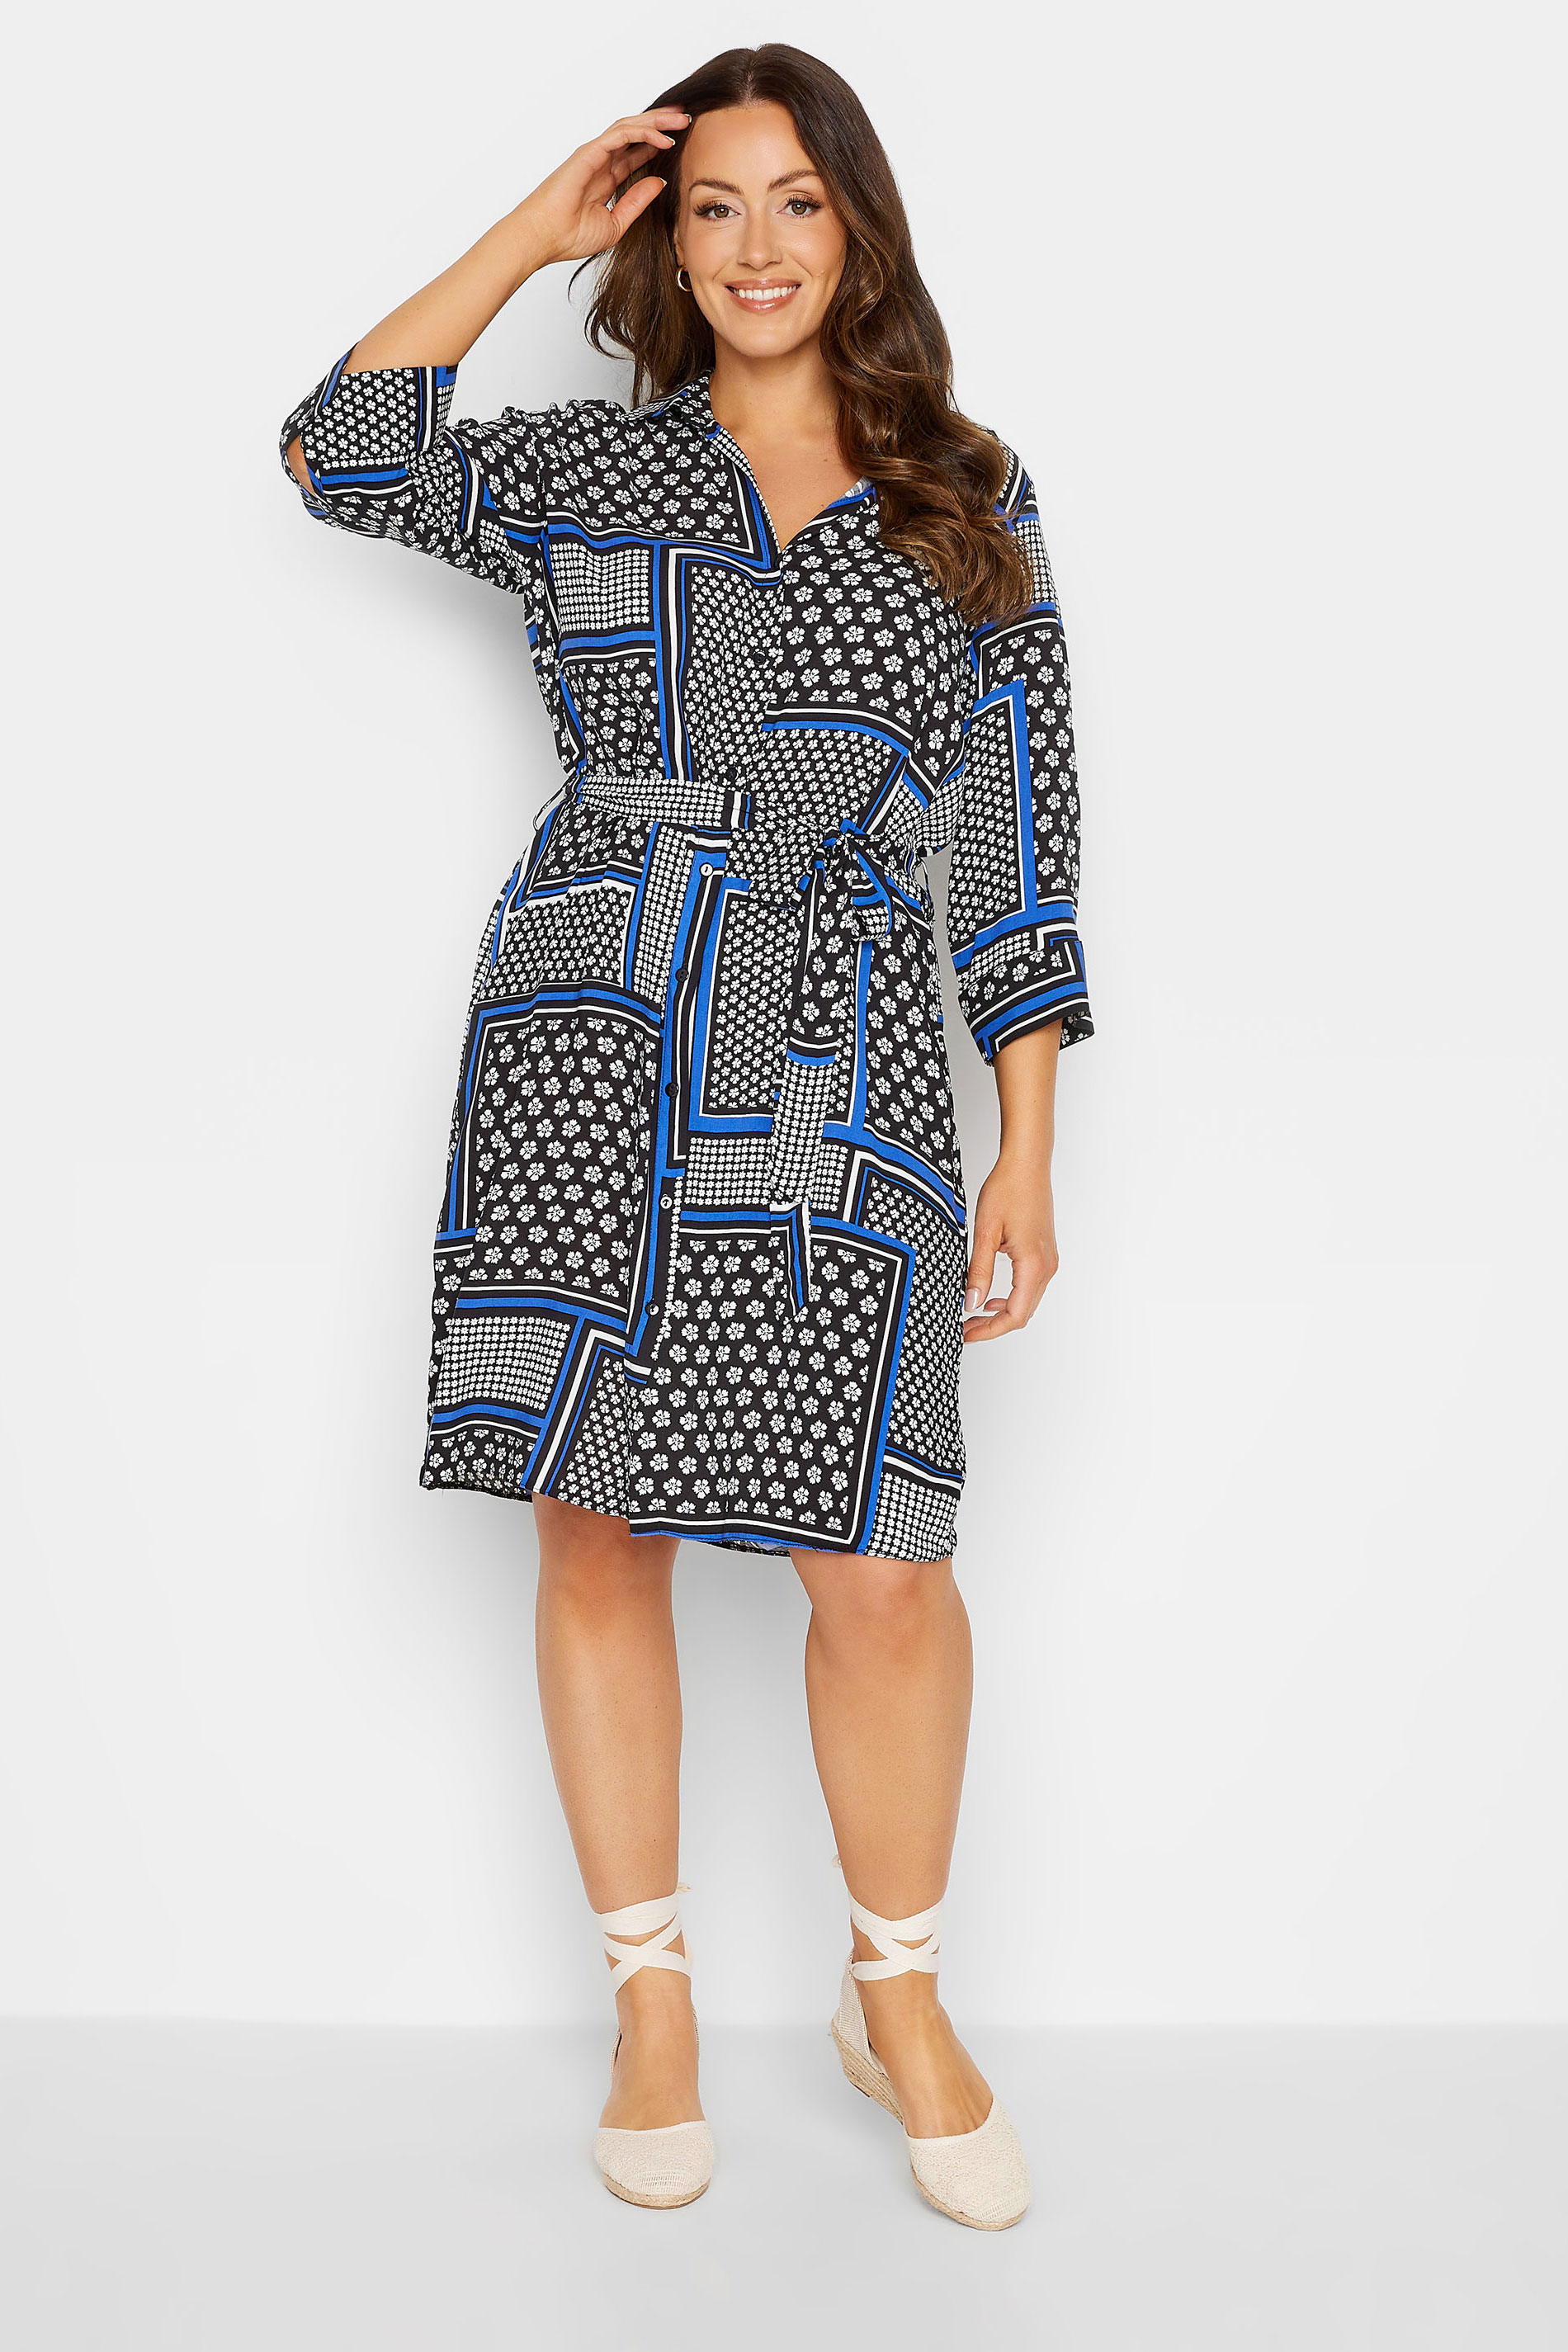 M&Co Black Patchwork Print Belted Tunic Shirt Dress | M&Co 2